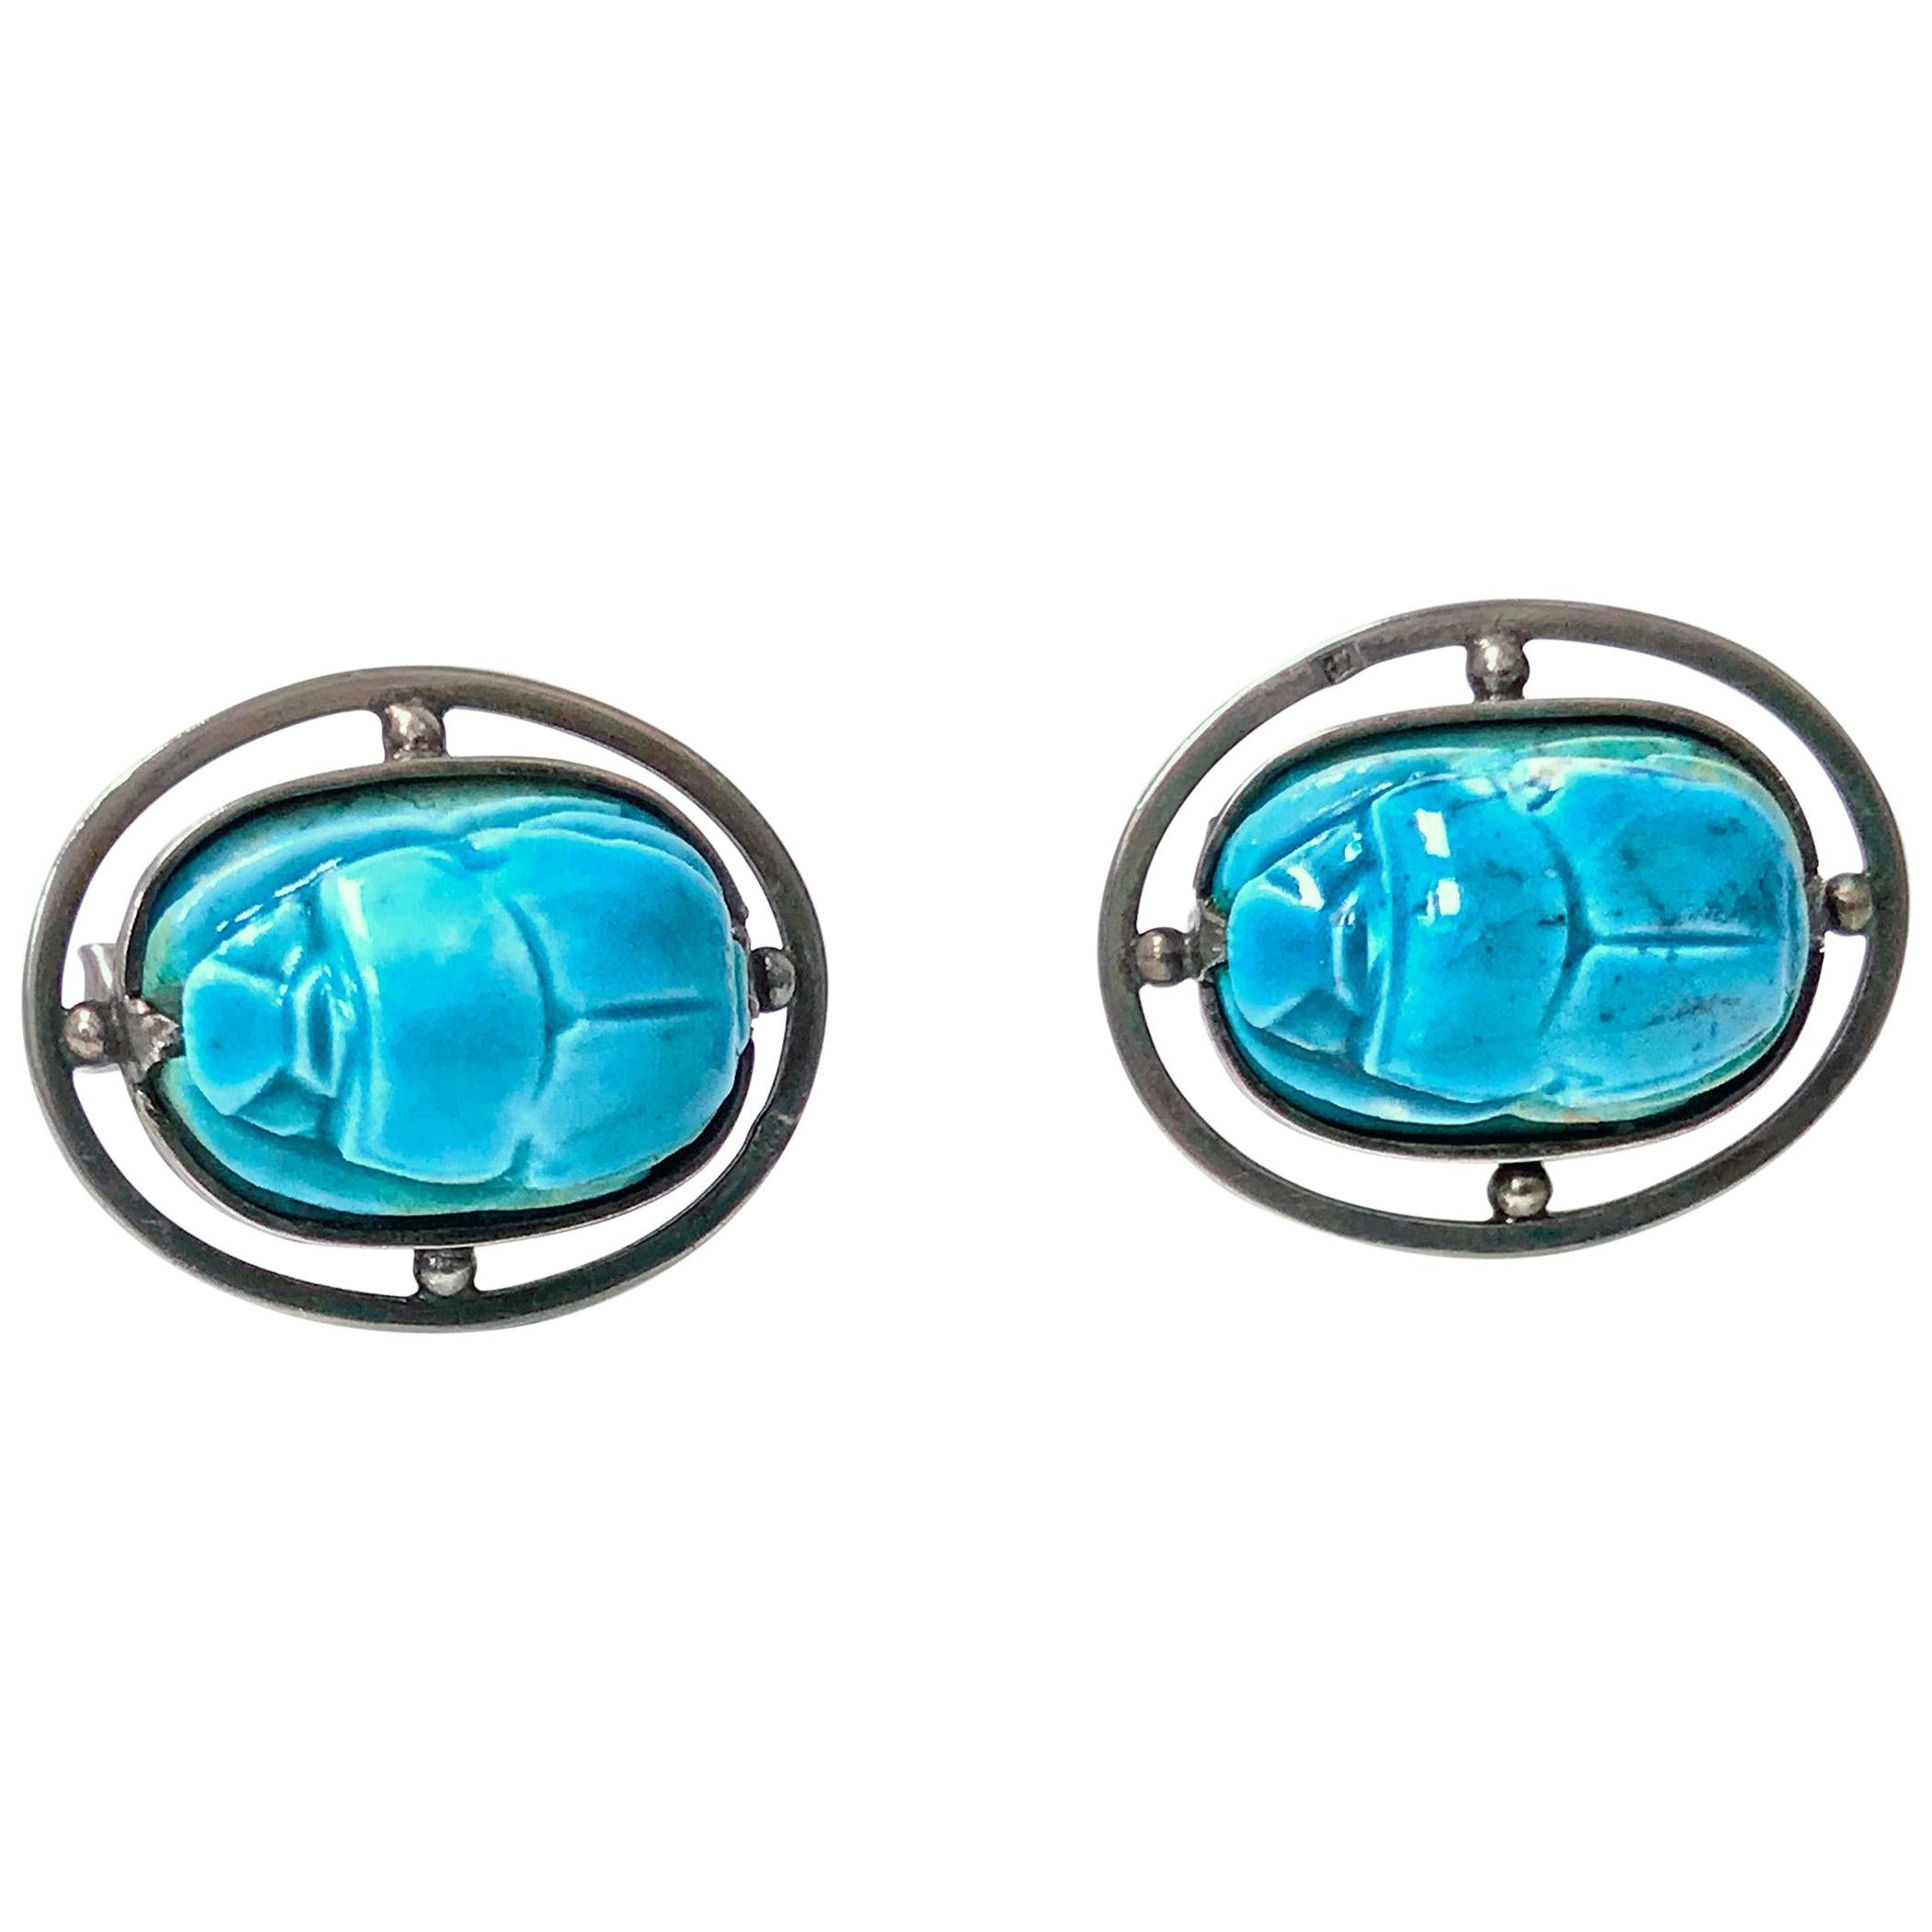 1960s Egyptian Revival Silver Turquoise Scarab Cufflinks